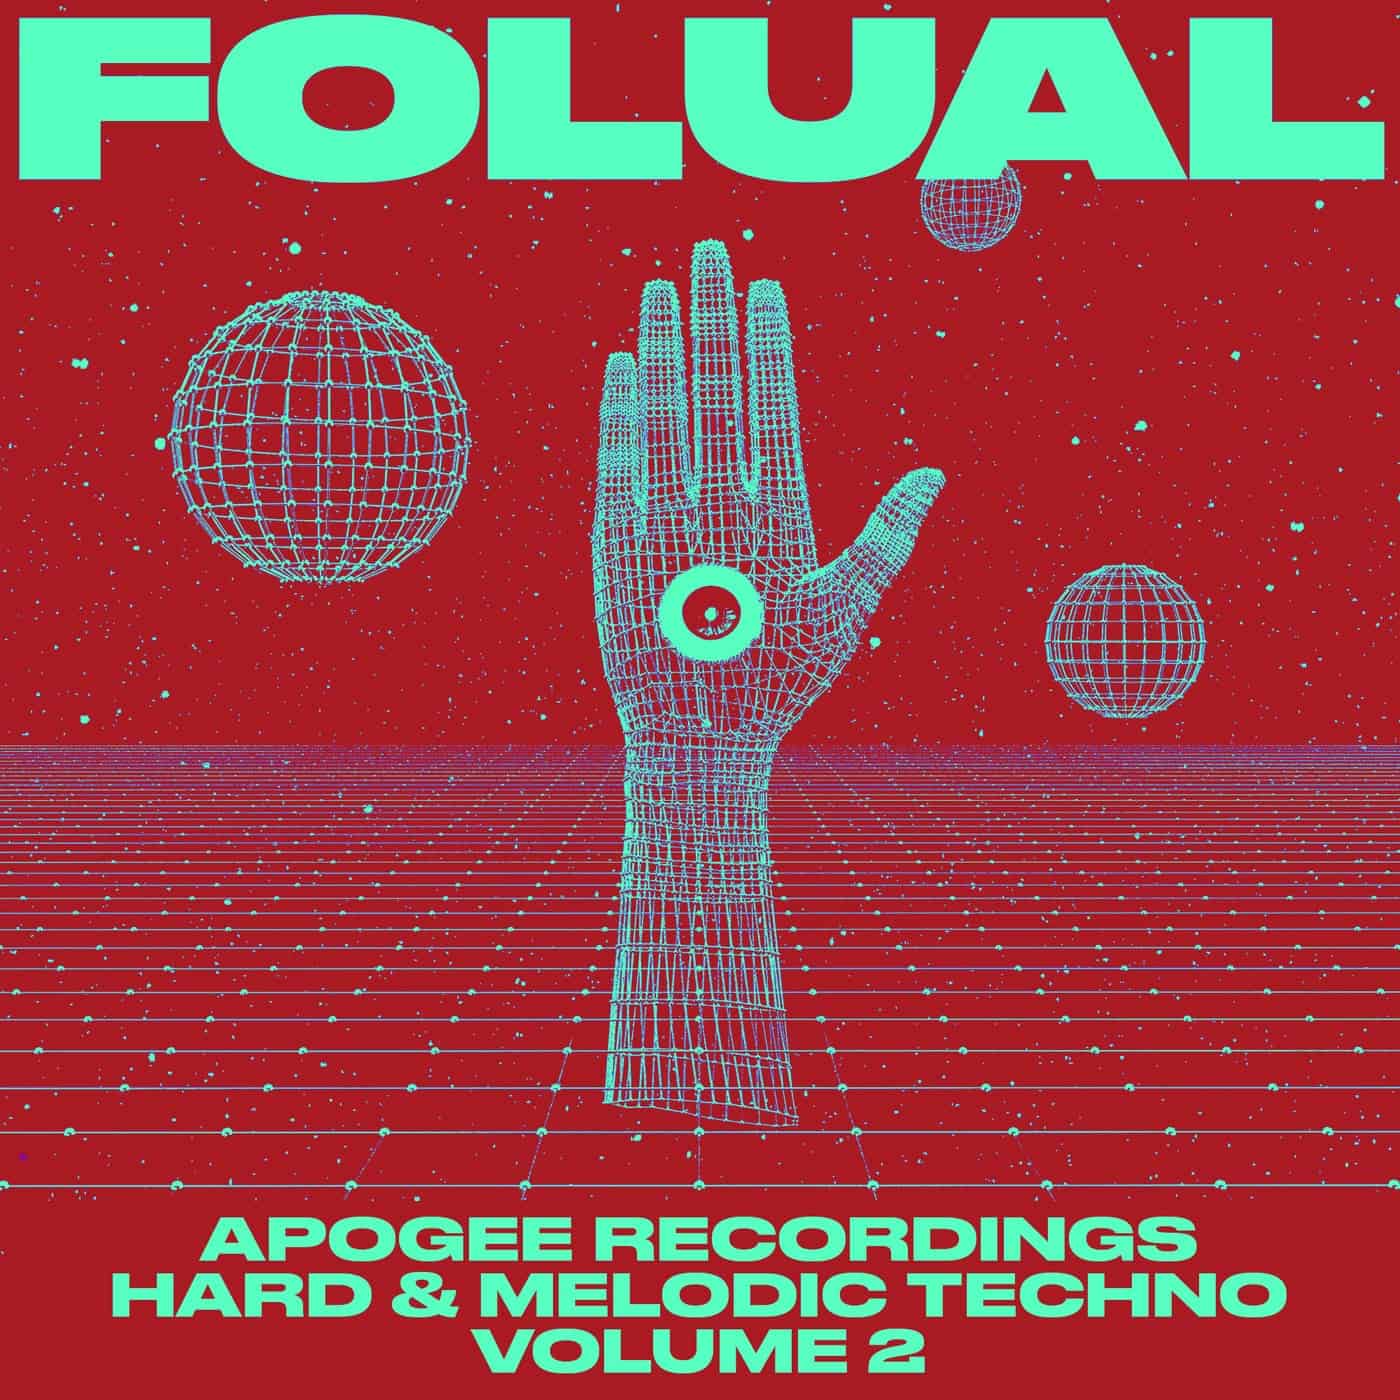 Download Apogee Recordings Hard & Melodic Techno Vol. 2 on Electrobuzz